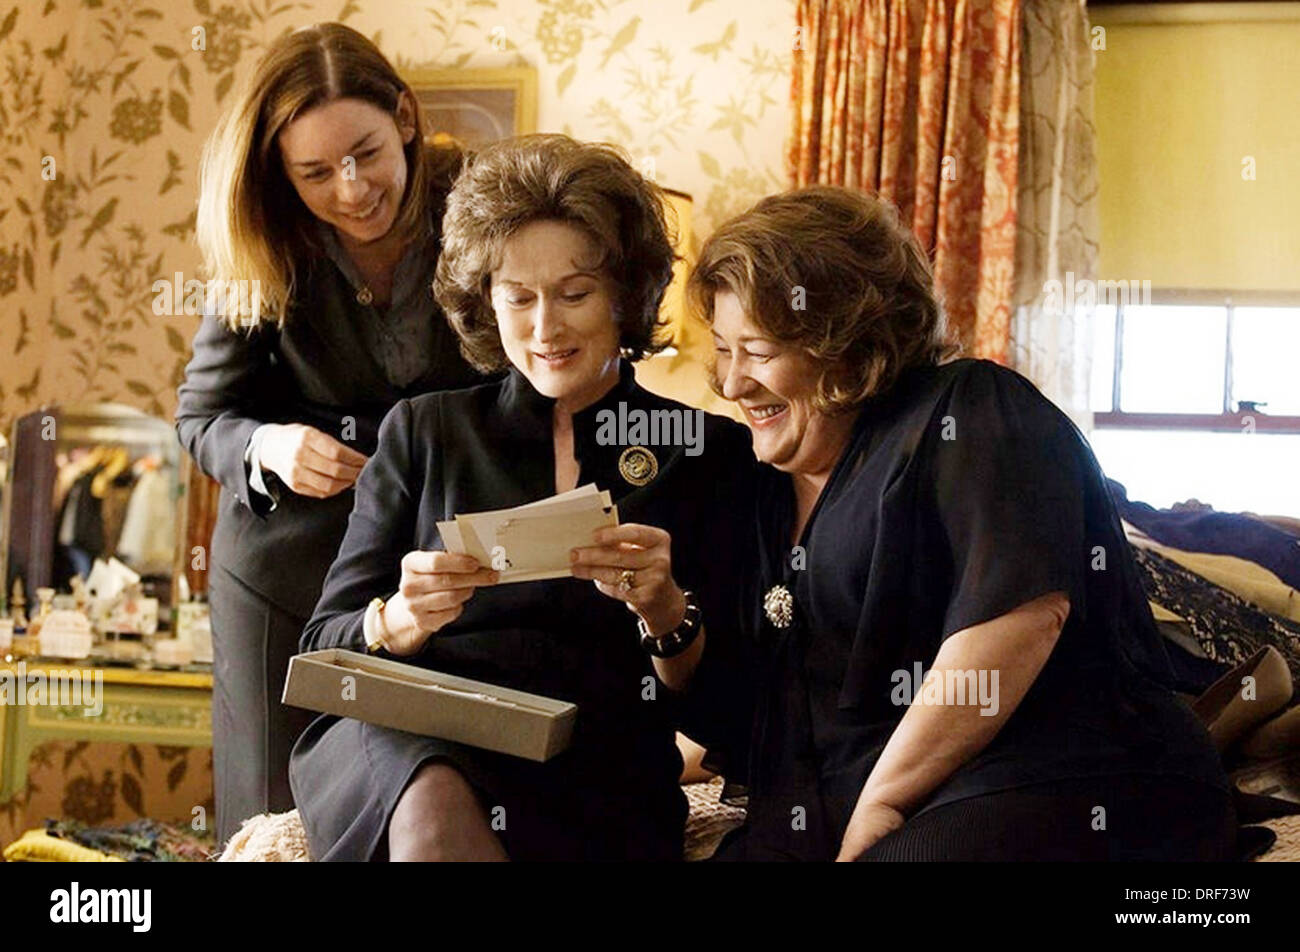 OSAGE COUNTY 2013 Weinstein Company film with from left: Julianne Nicholson, Meryl Streep and Margo Martindale Stock Photo